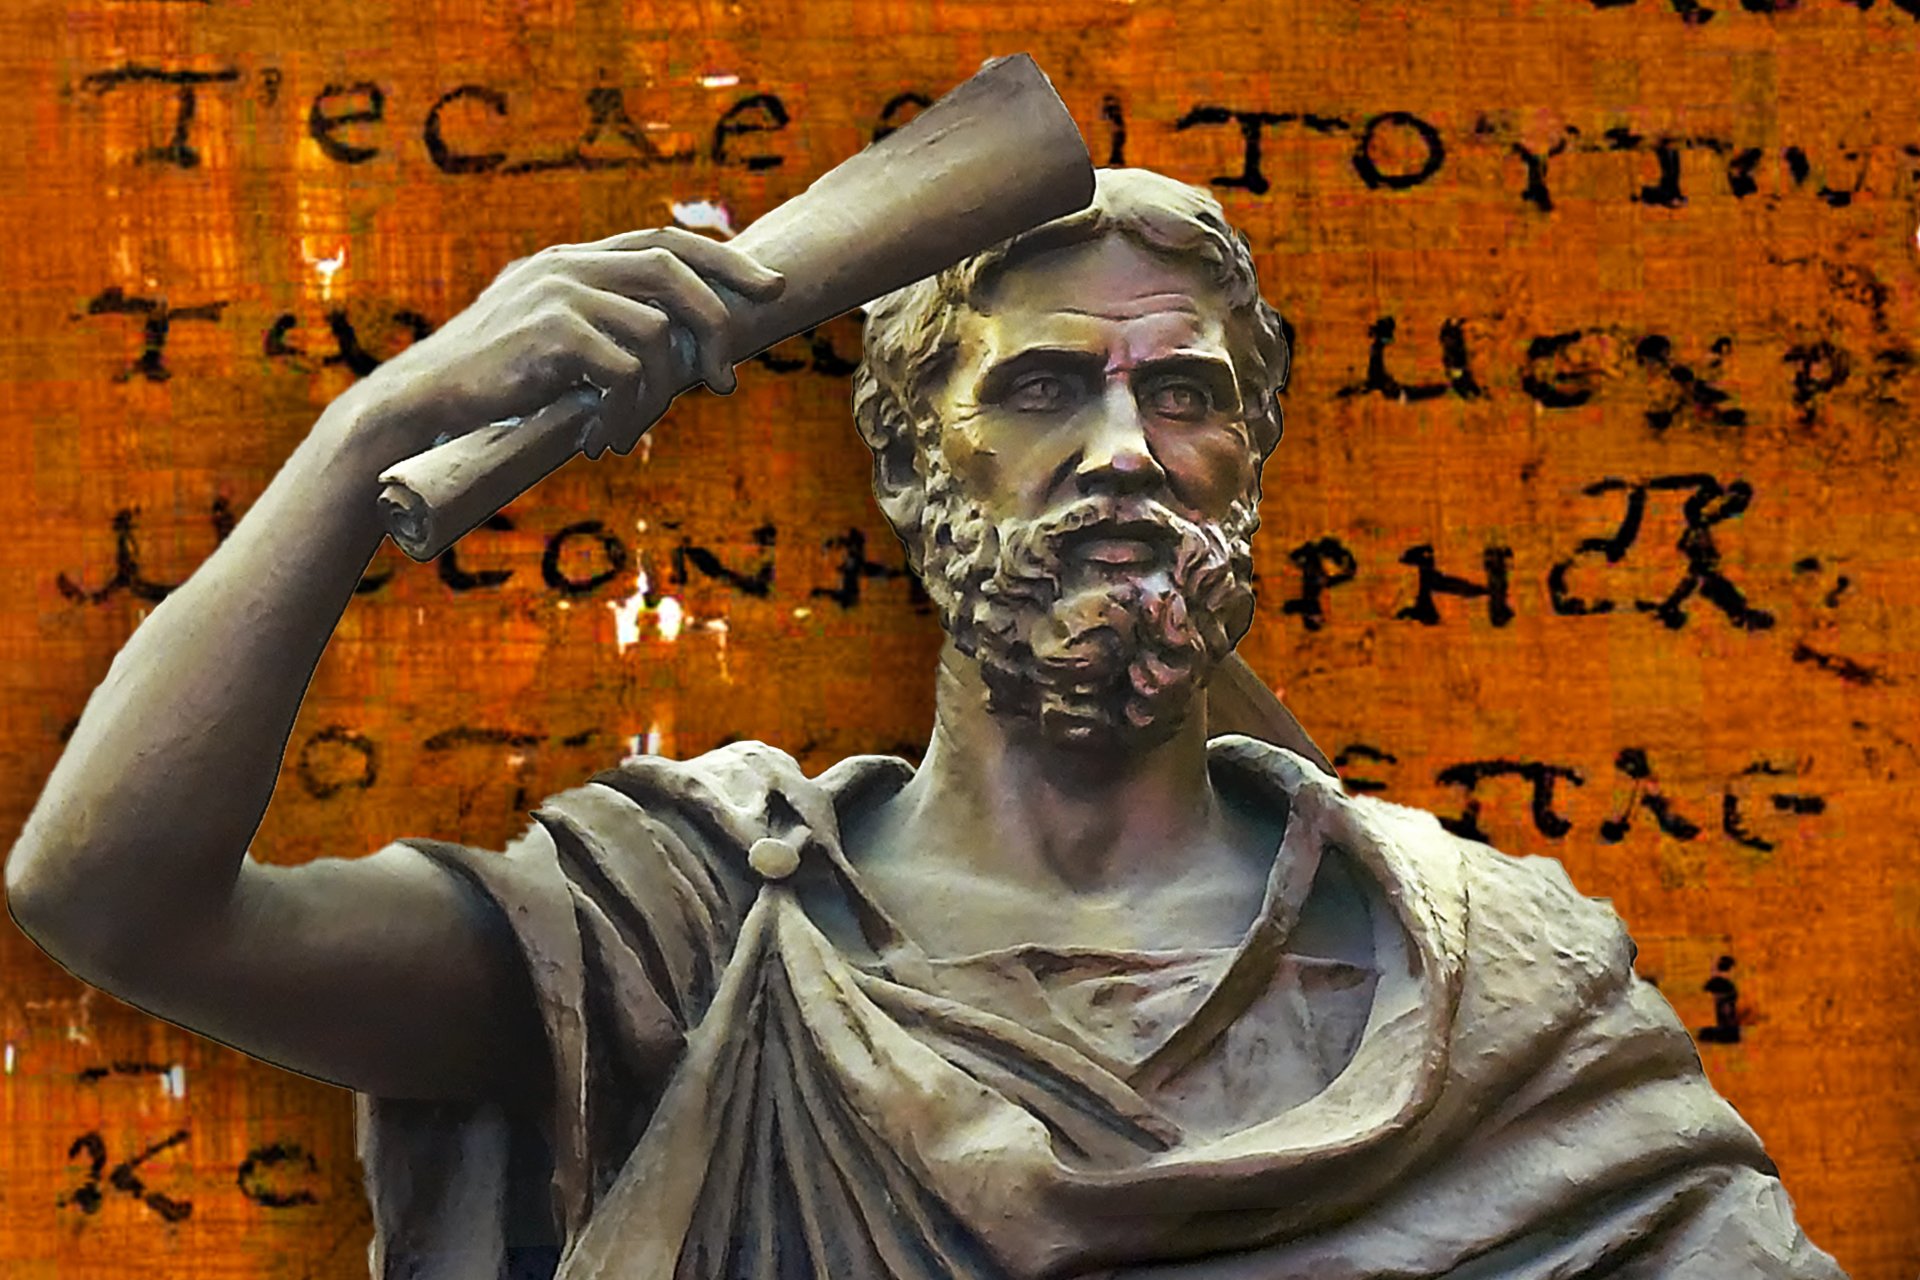 A bronze statue of Herodotus in a toga holding a scroll in front of a page from Herodotus' Histories book, in Greek writing.